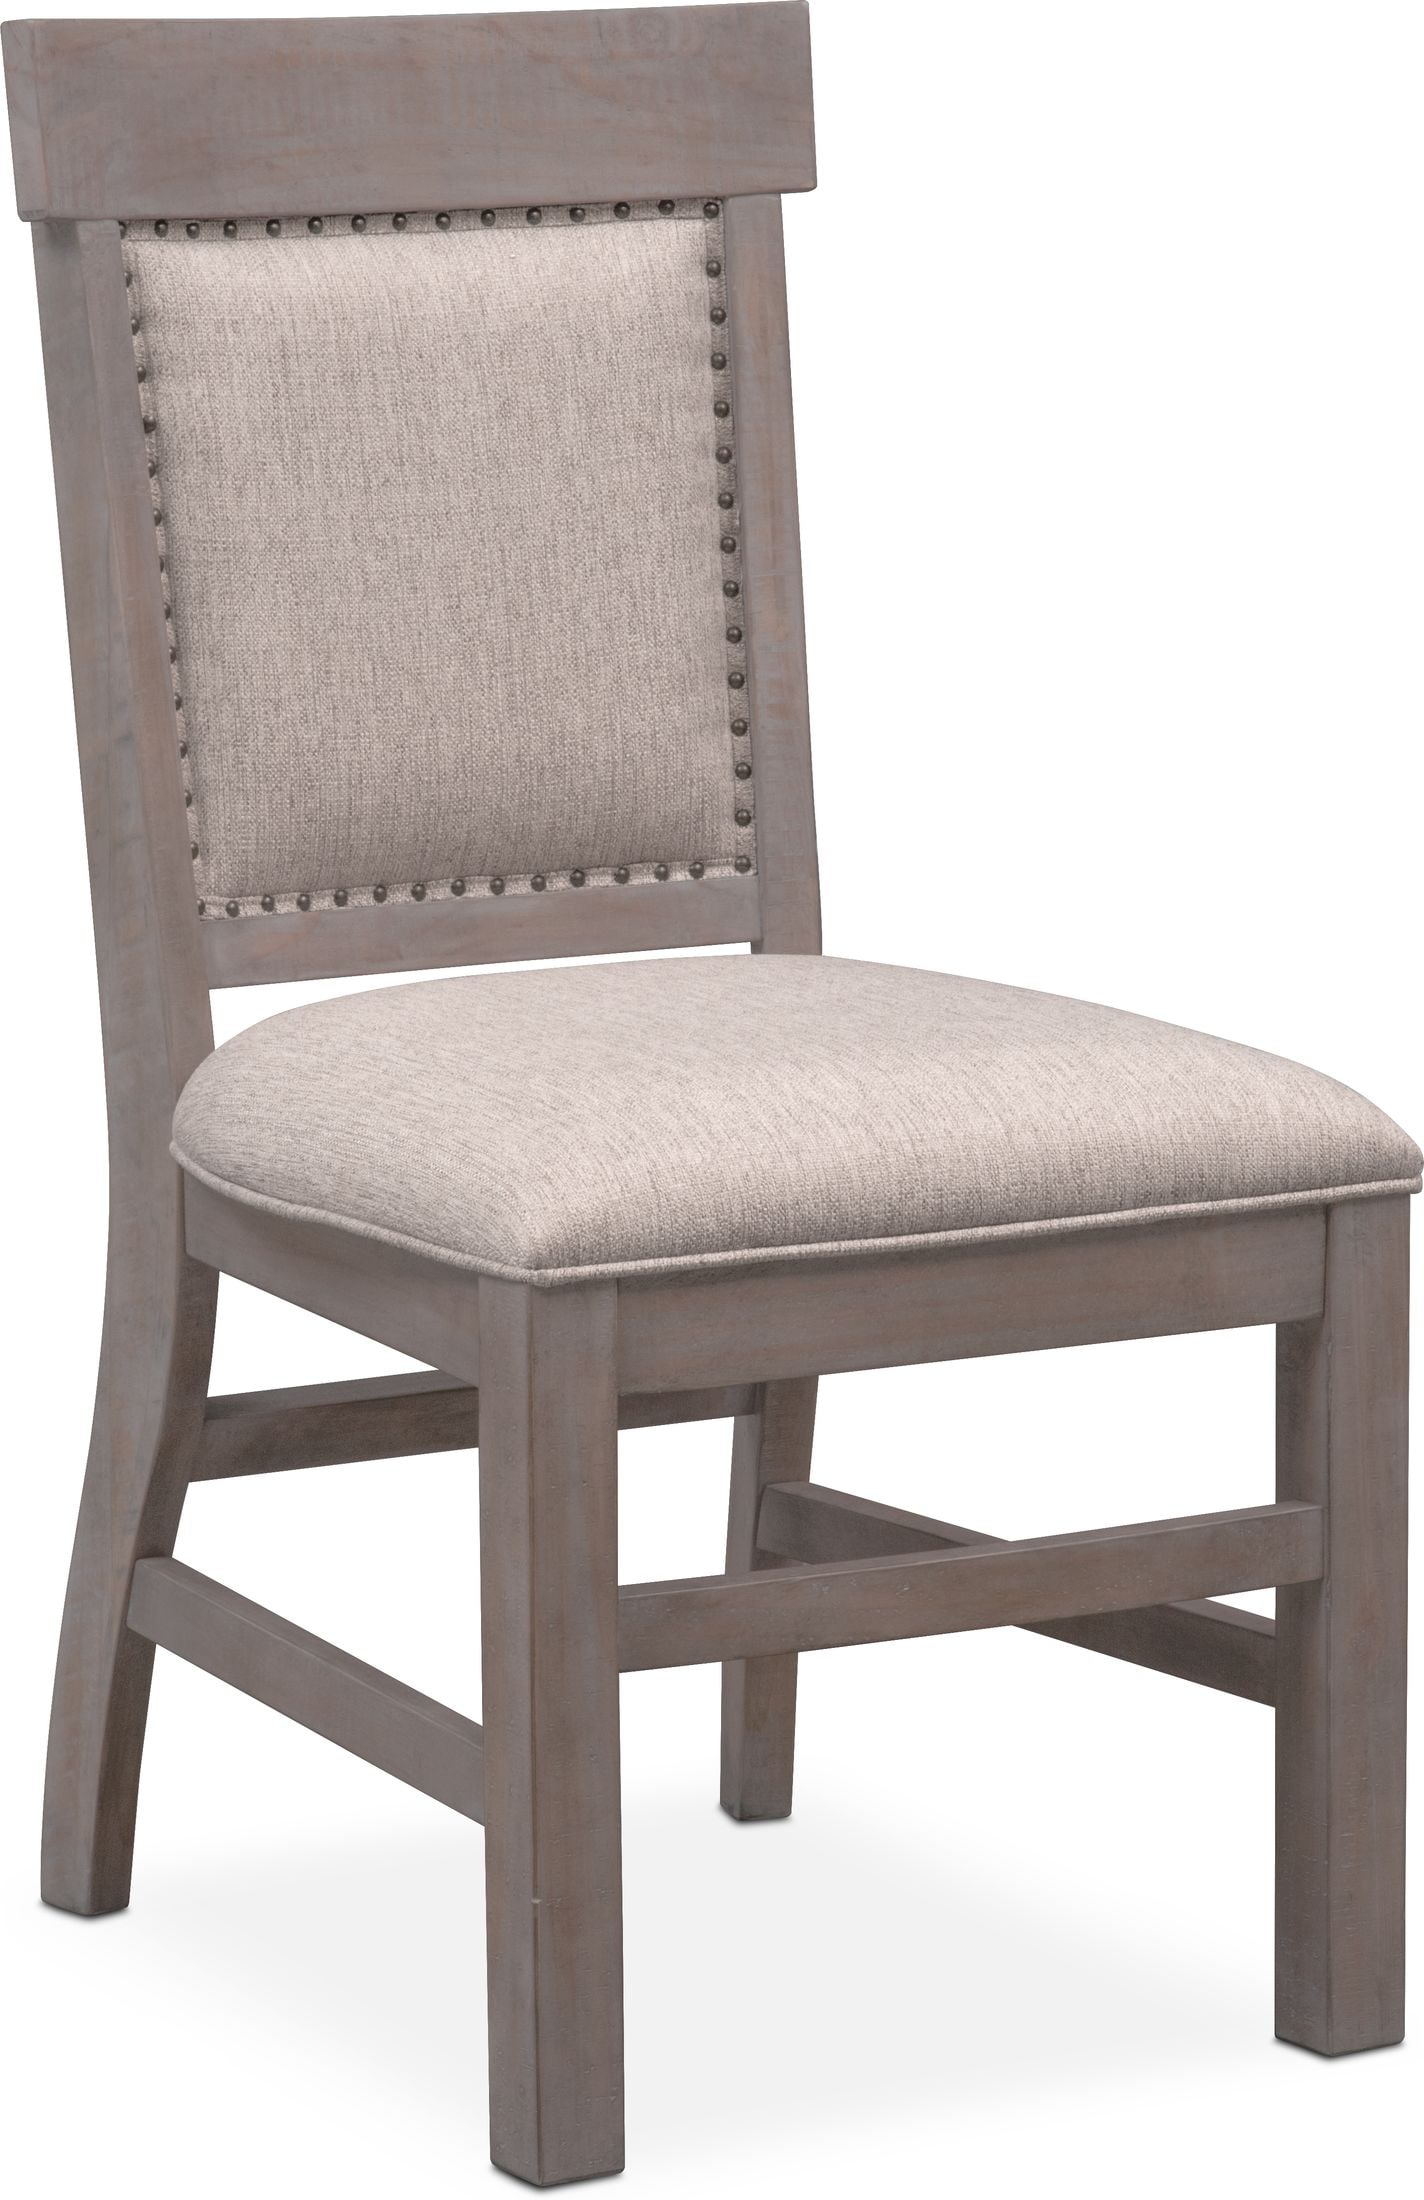 Charthouse Upholstered Dining Chair, Gray Upholstered Dining Chairs With Arms